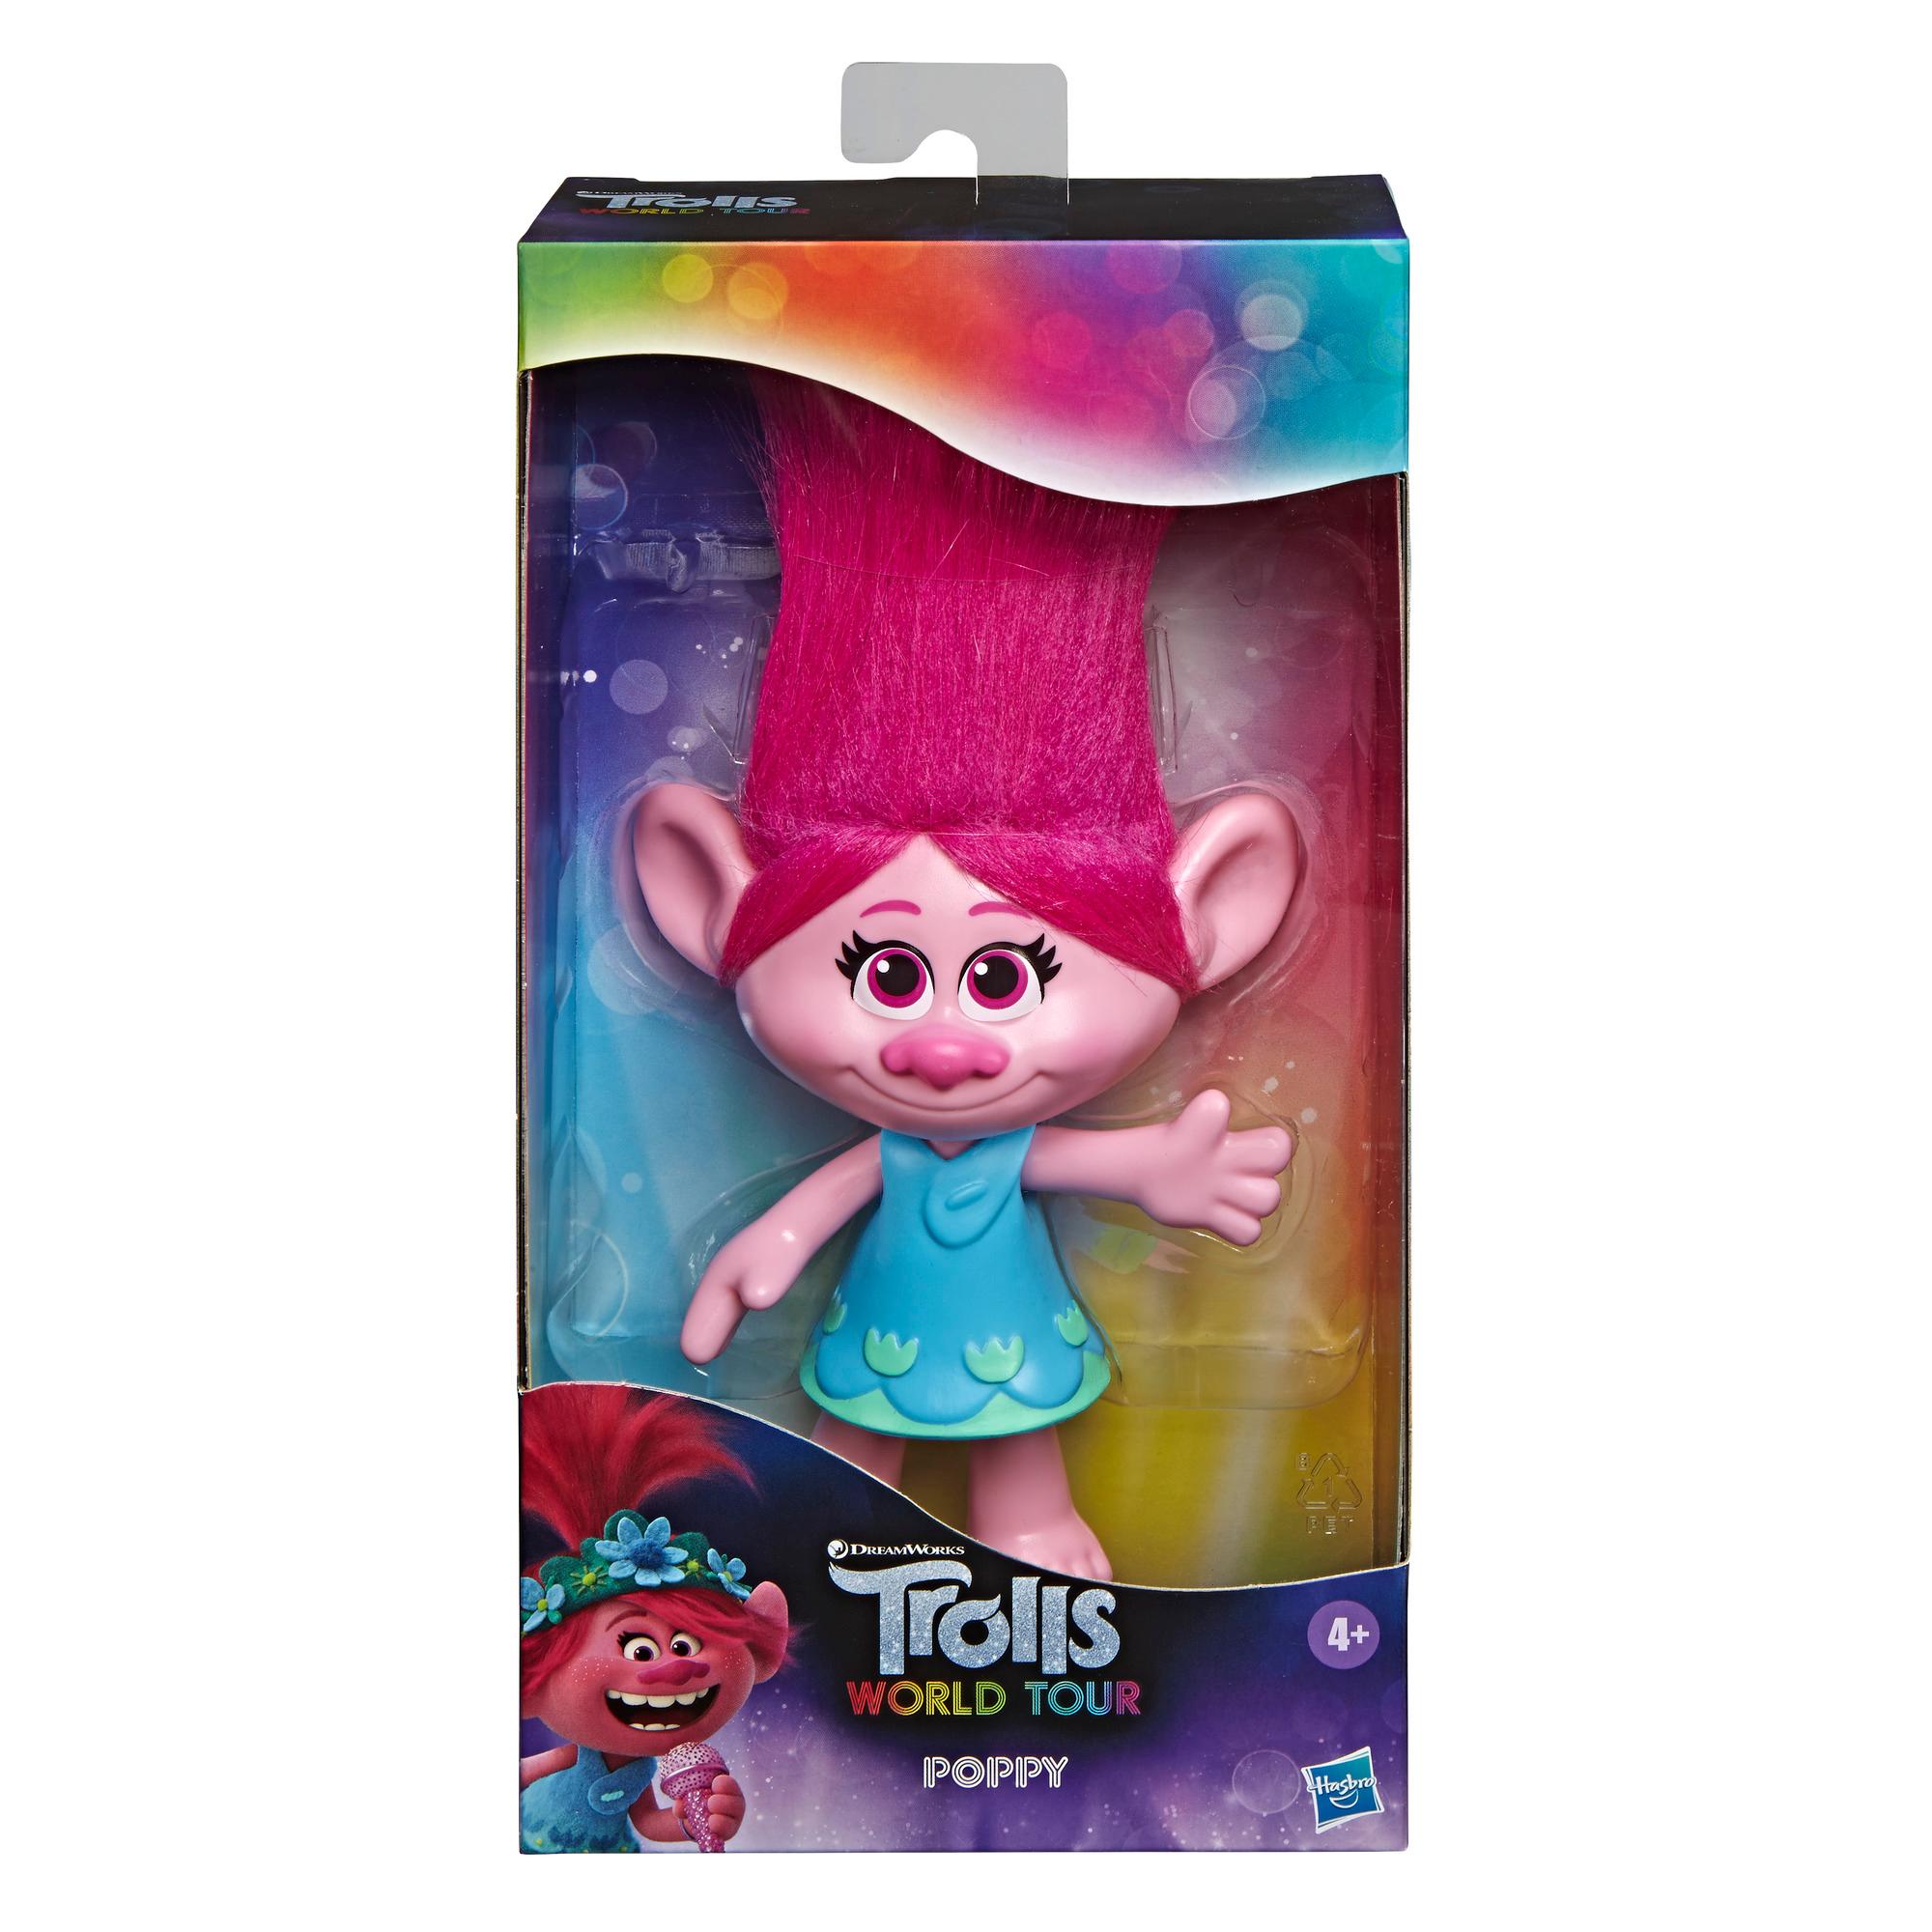 DreamWorks Trolls Poppy Doll with Removable Dress, Inspired by Trolls World Tour, Toy for Girls 4 Years and Up